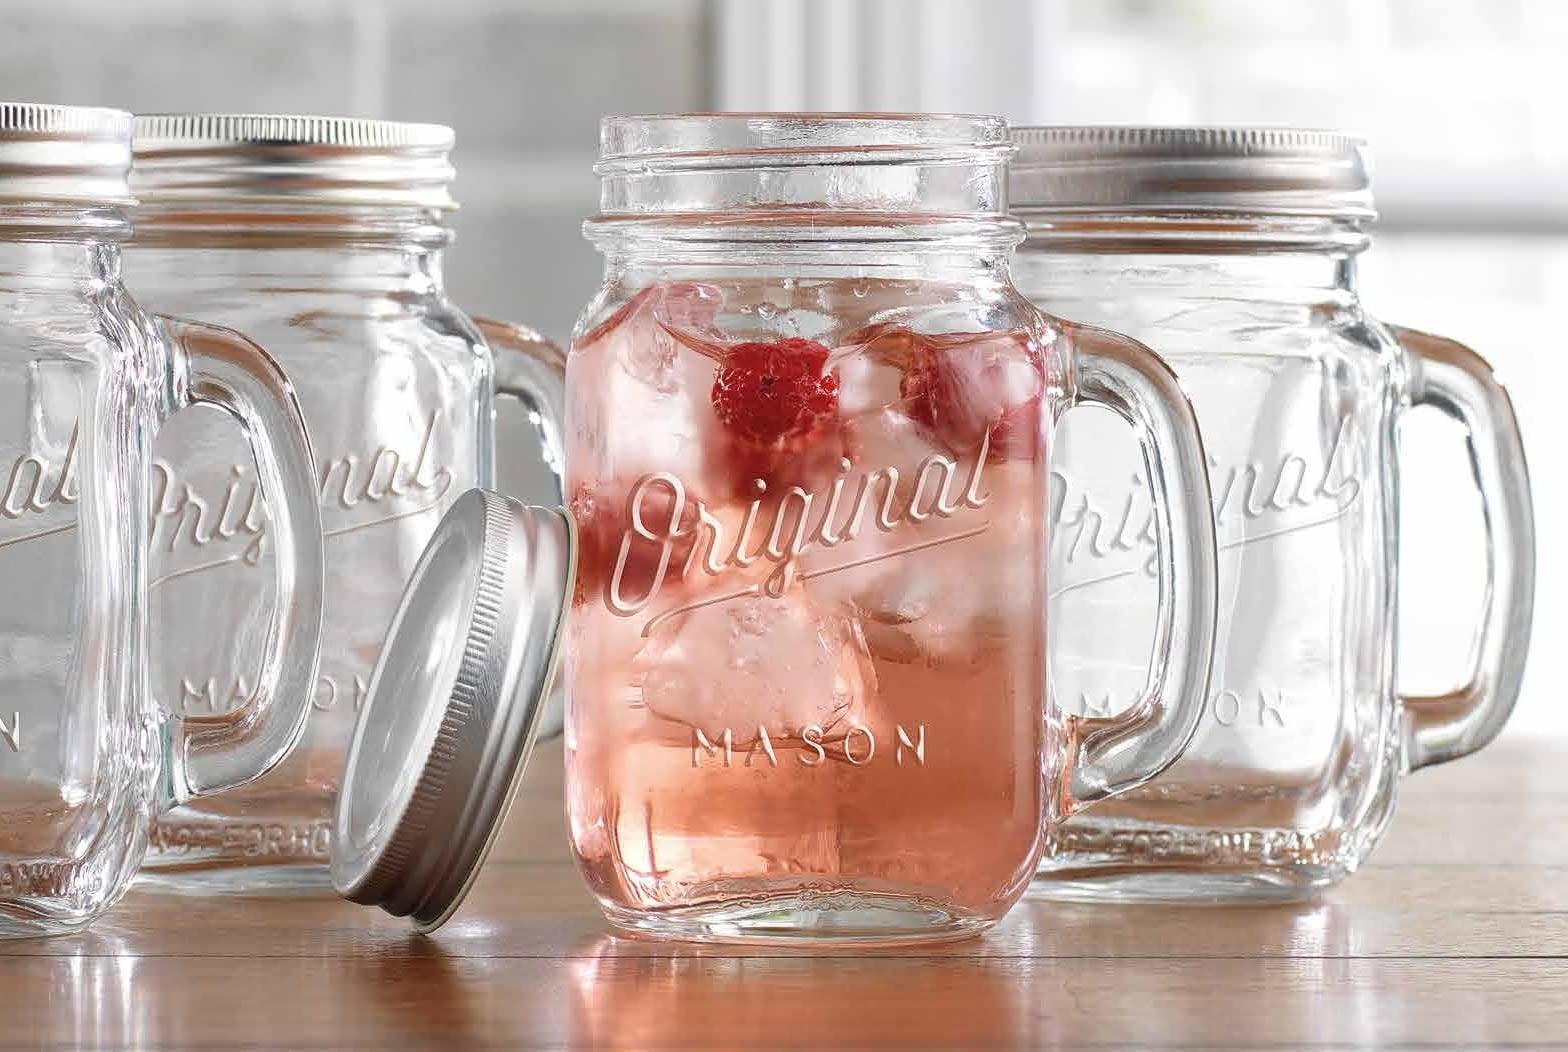 Mason Jar 16 Oz. Glass Mugs with Handle and Lid Set Of 4 - Home Essentials & Beyond - Old Fashioned Drinking Glass Bottles Original Mason Jar Pint Sized Cup Set.  - Acceptable